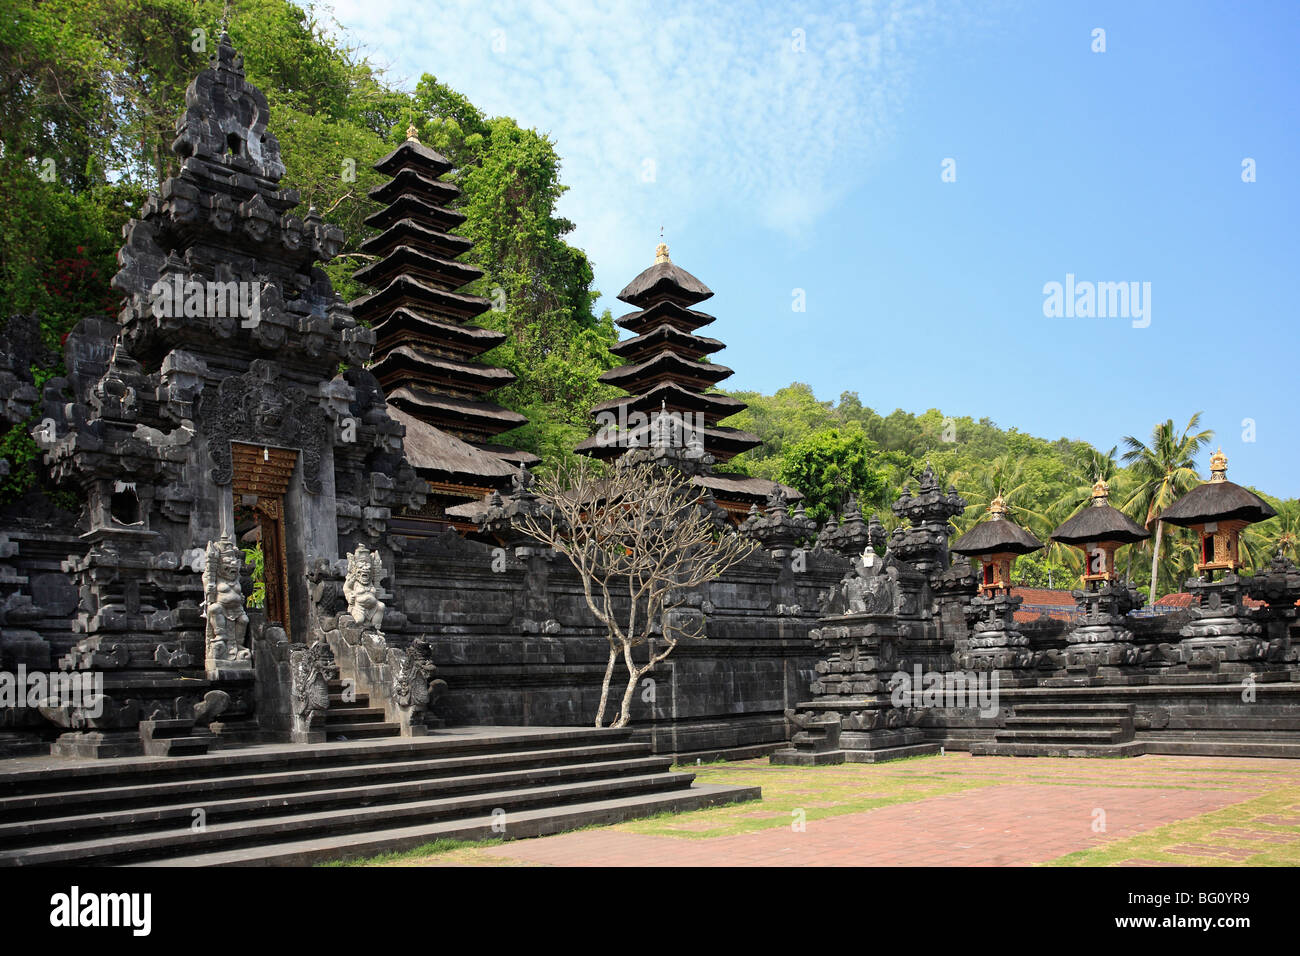 Pura Goa Lawah Temple in Bali, also known as Bat Cave Temple because of the thousands of bats that live there. Stock Photo